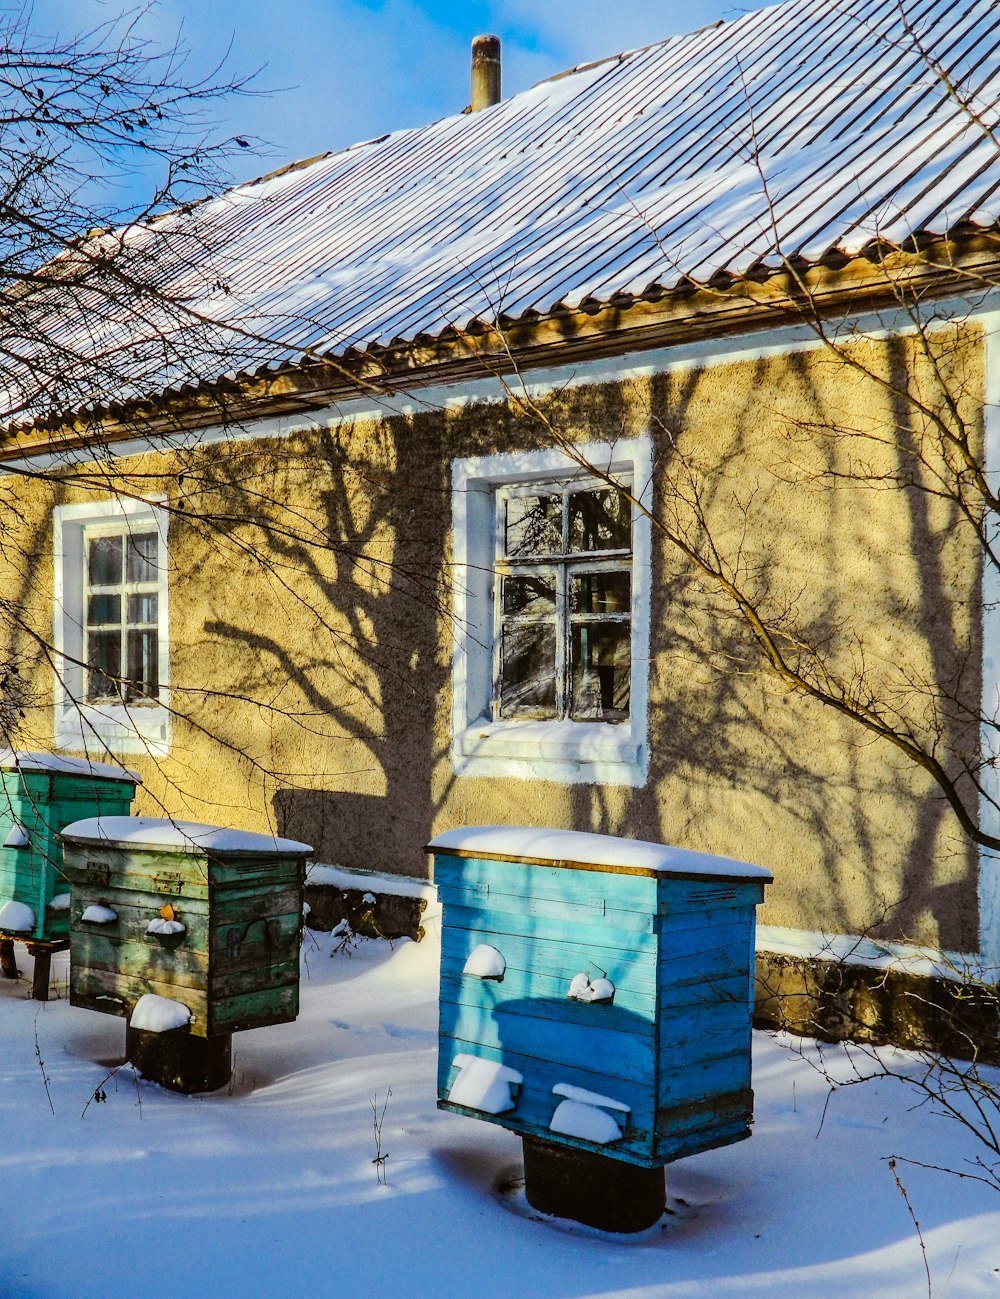 a house with a blue shed and snow on the ground